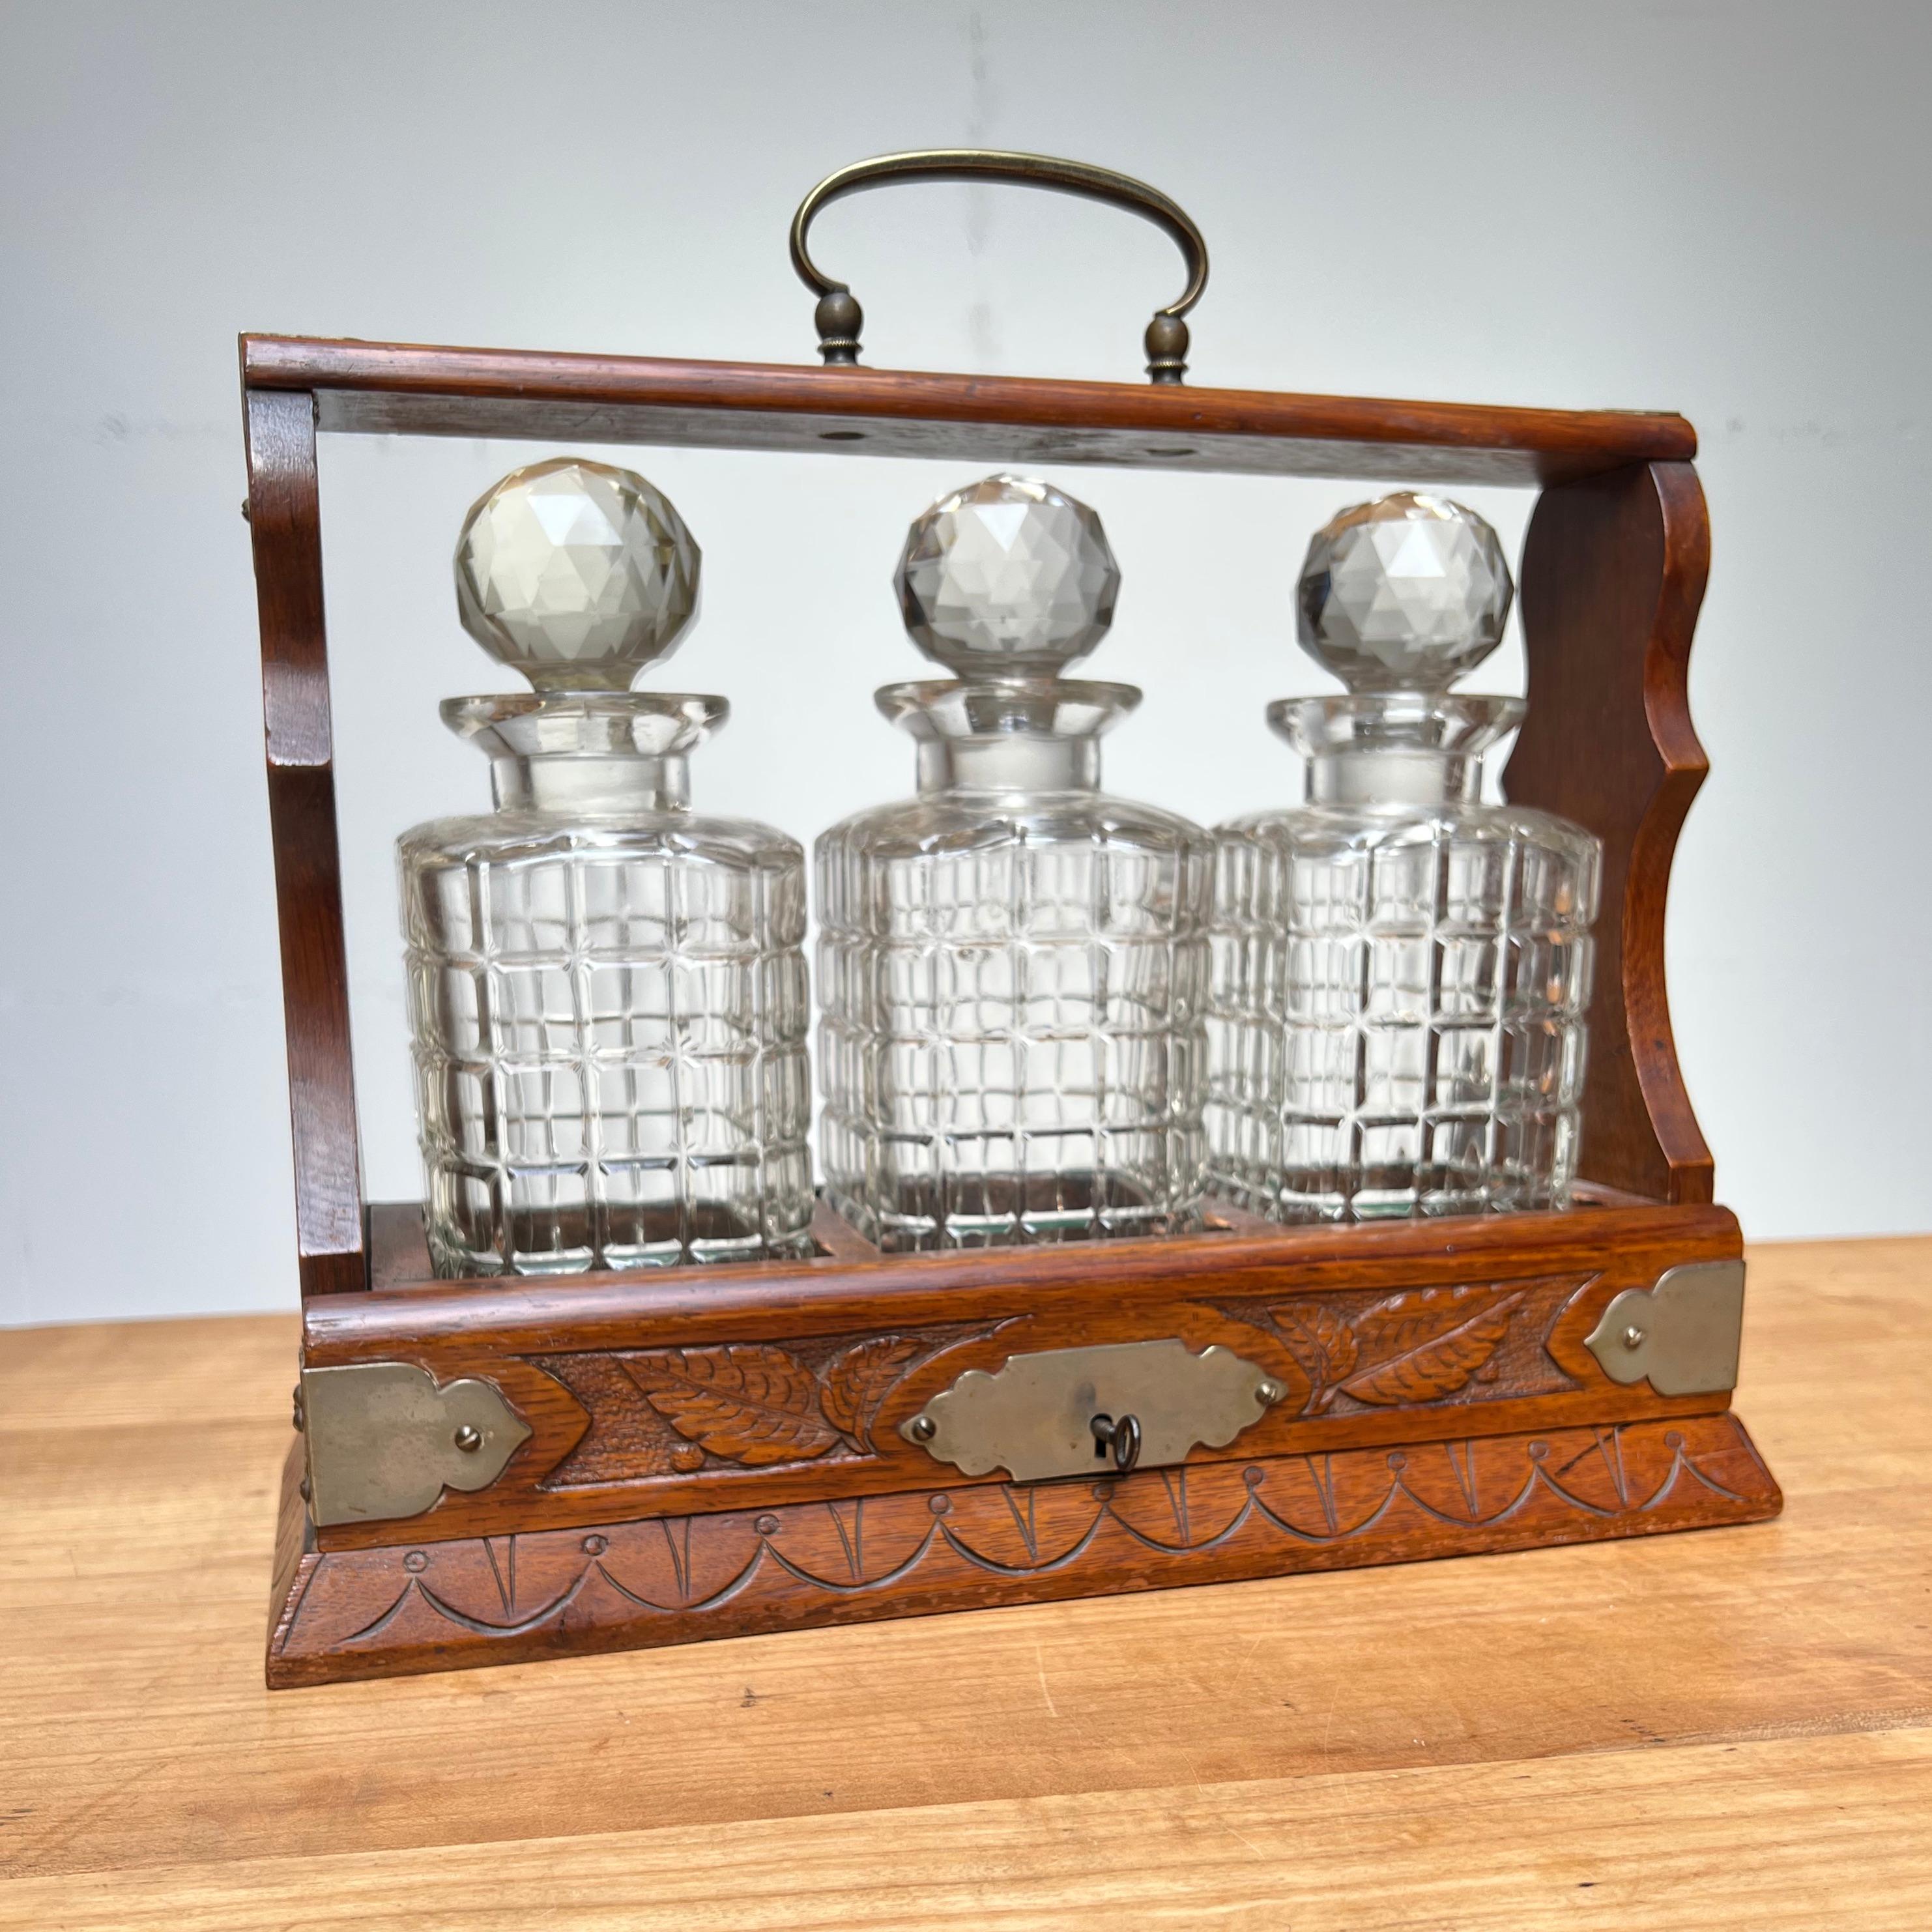 Good size and fine design, antique tantalus

This amazing condition and rare, three crystal bottles holding, tiger oak tantalus will look great everywhere. This handcrafted work of beauty dates from the early 1900s and it comes with beautiful